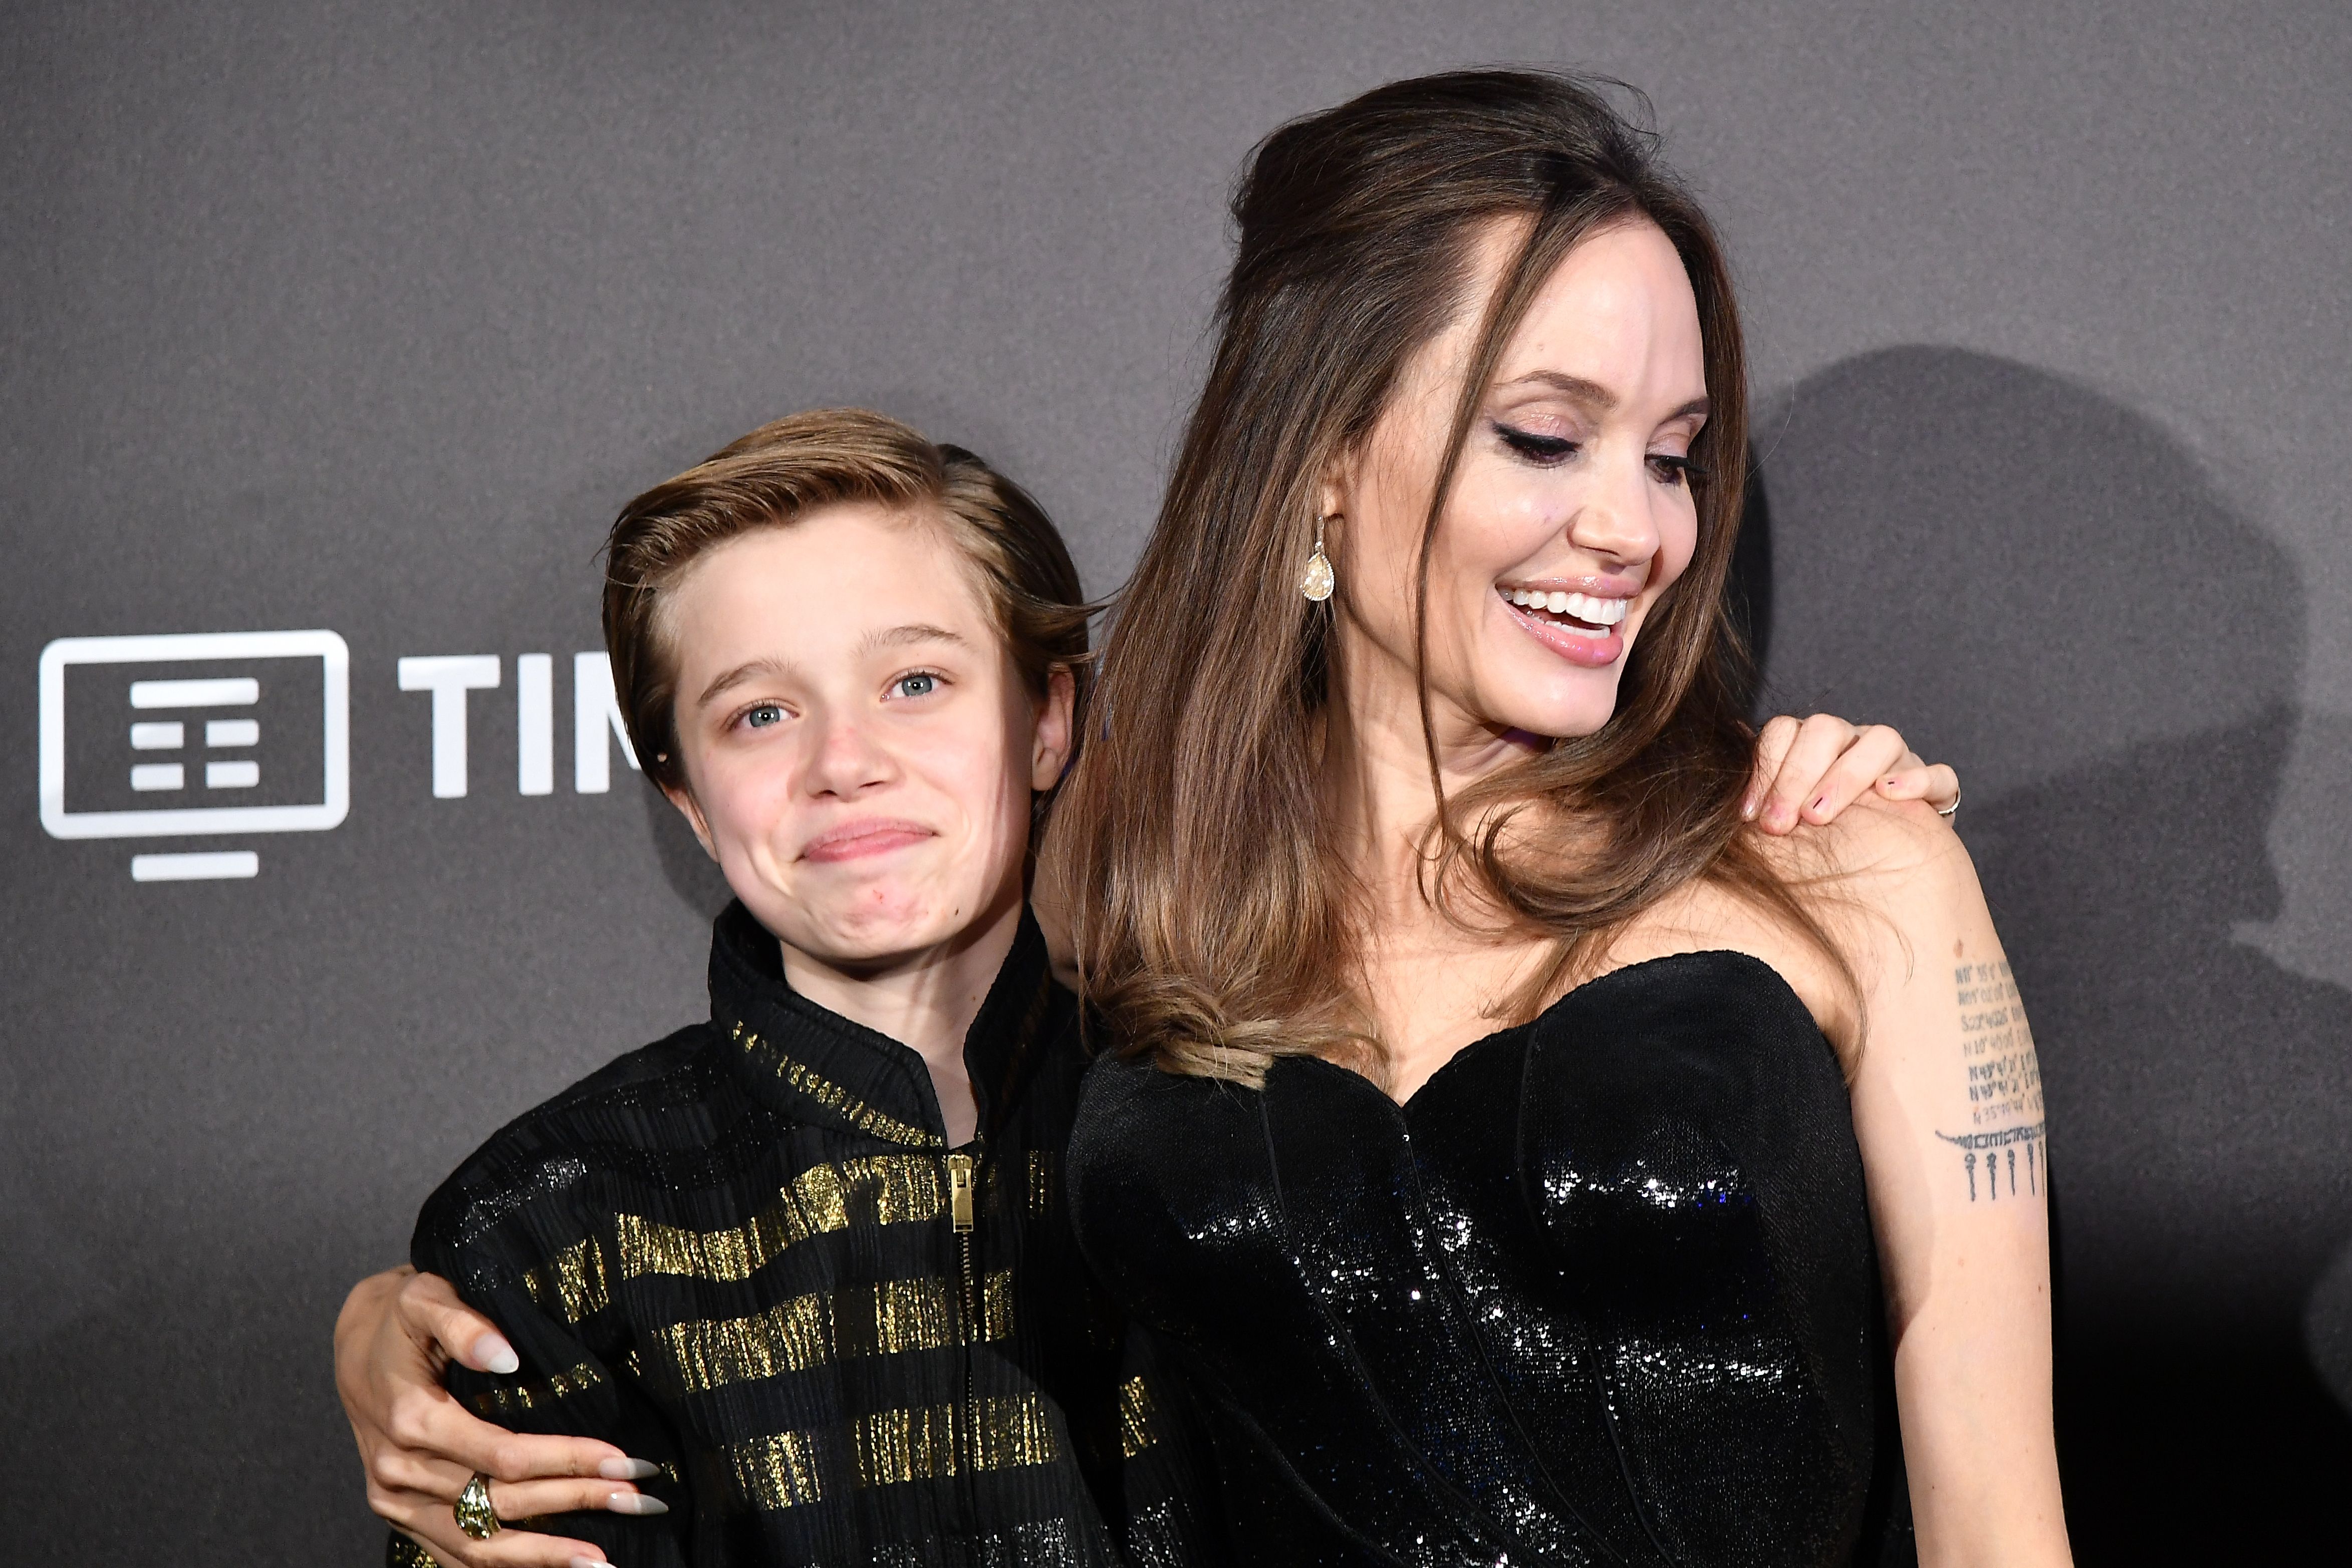 Shiloh Jolie-Pitt and Angelina Jolie attend the premiere of "Maleficent : Mistress of Evil" in Rome, Italy on October 7, 2019. | Source: Getty Images